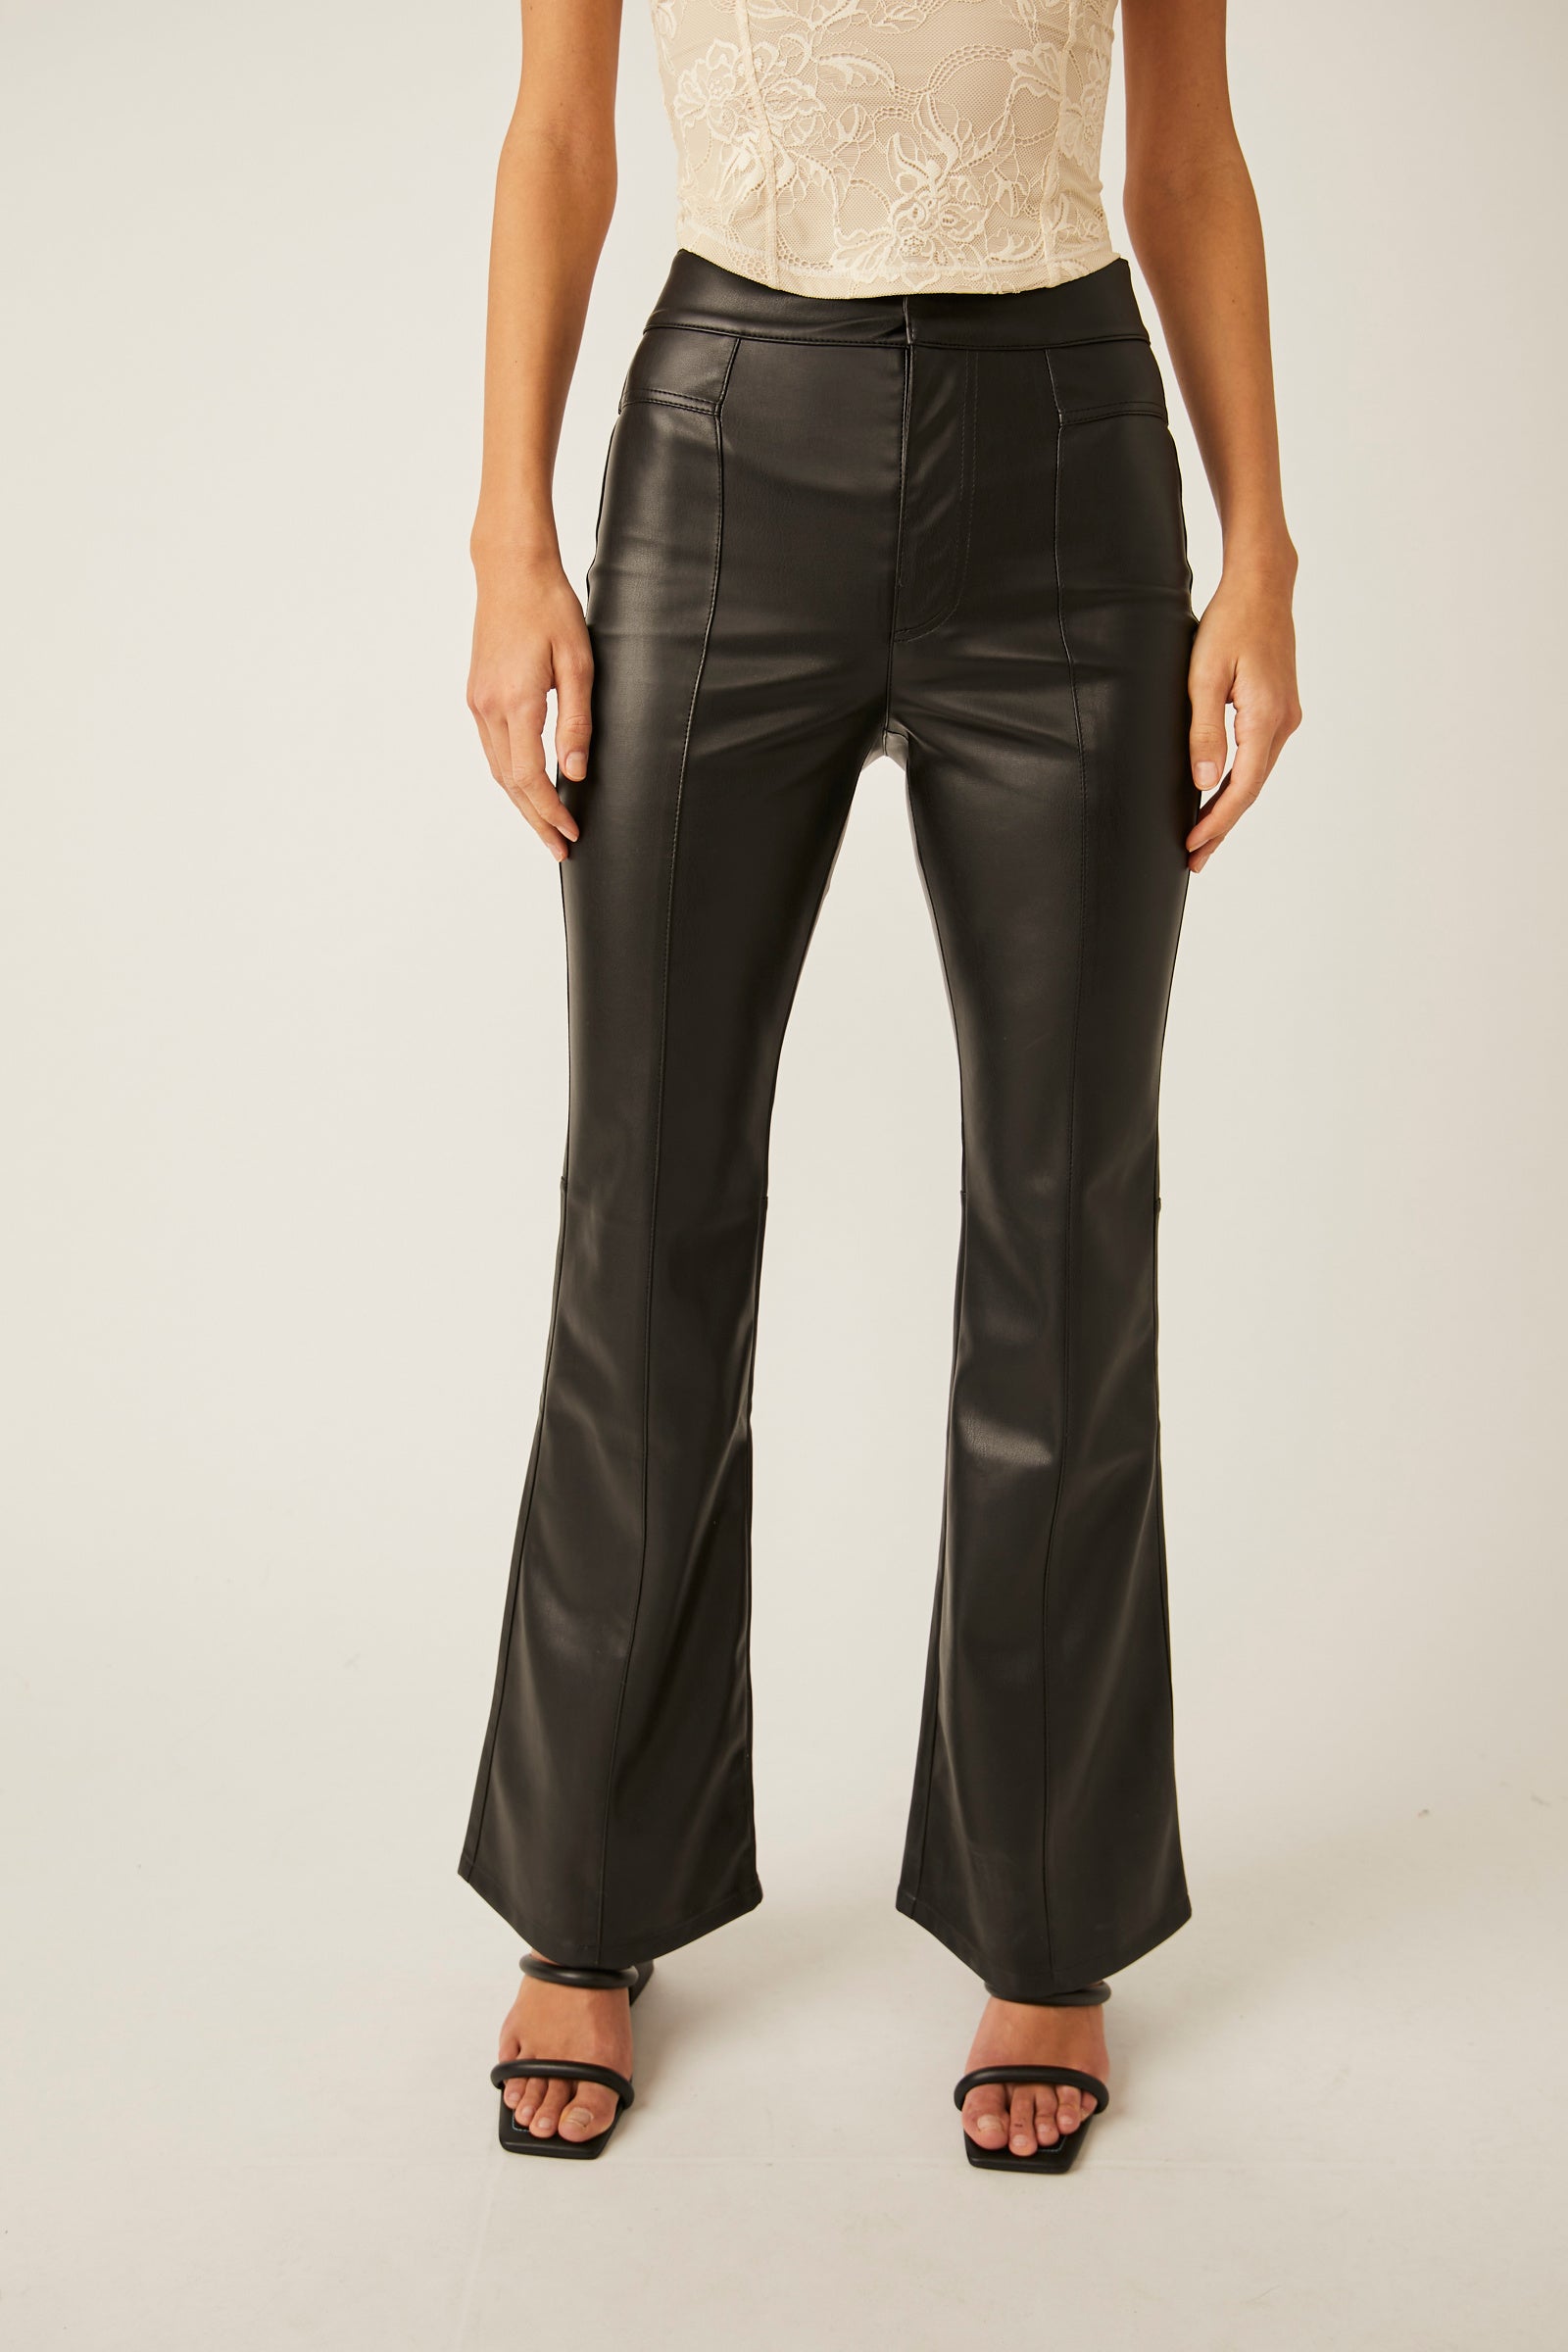 FREE PEOPLE UPTOWN HIGH RISE PANT IN BLACK